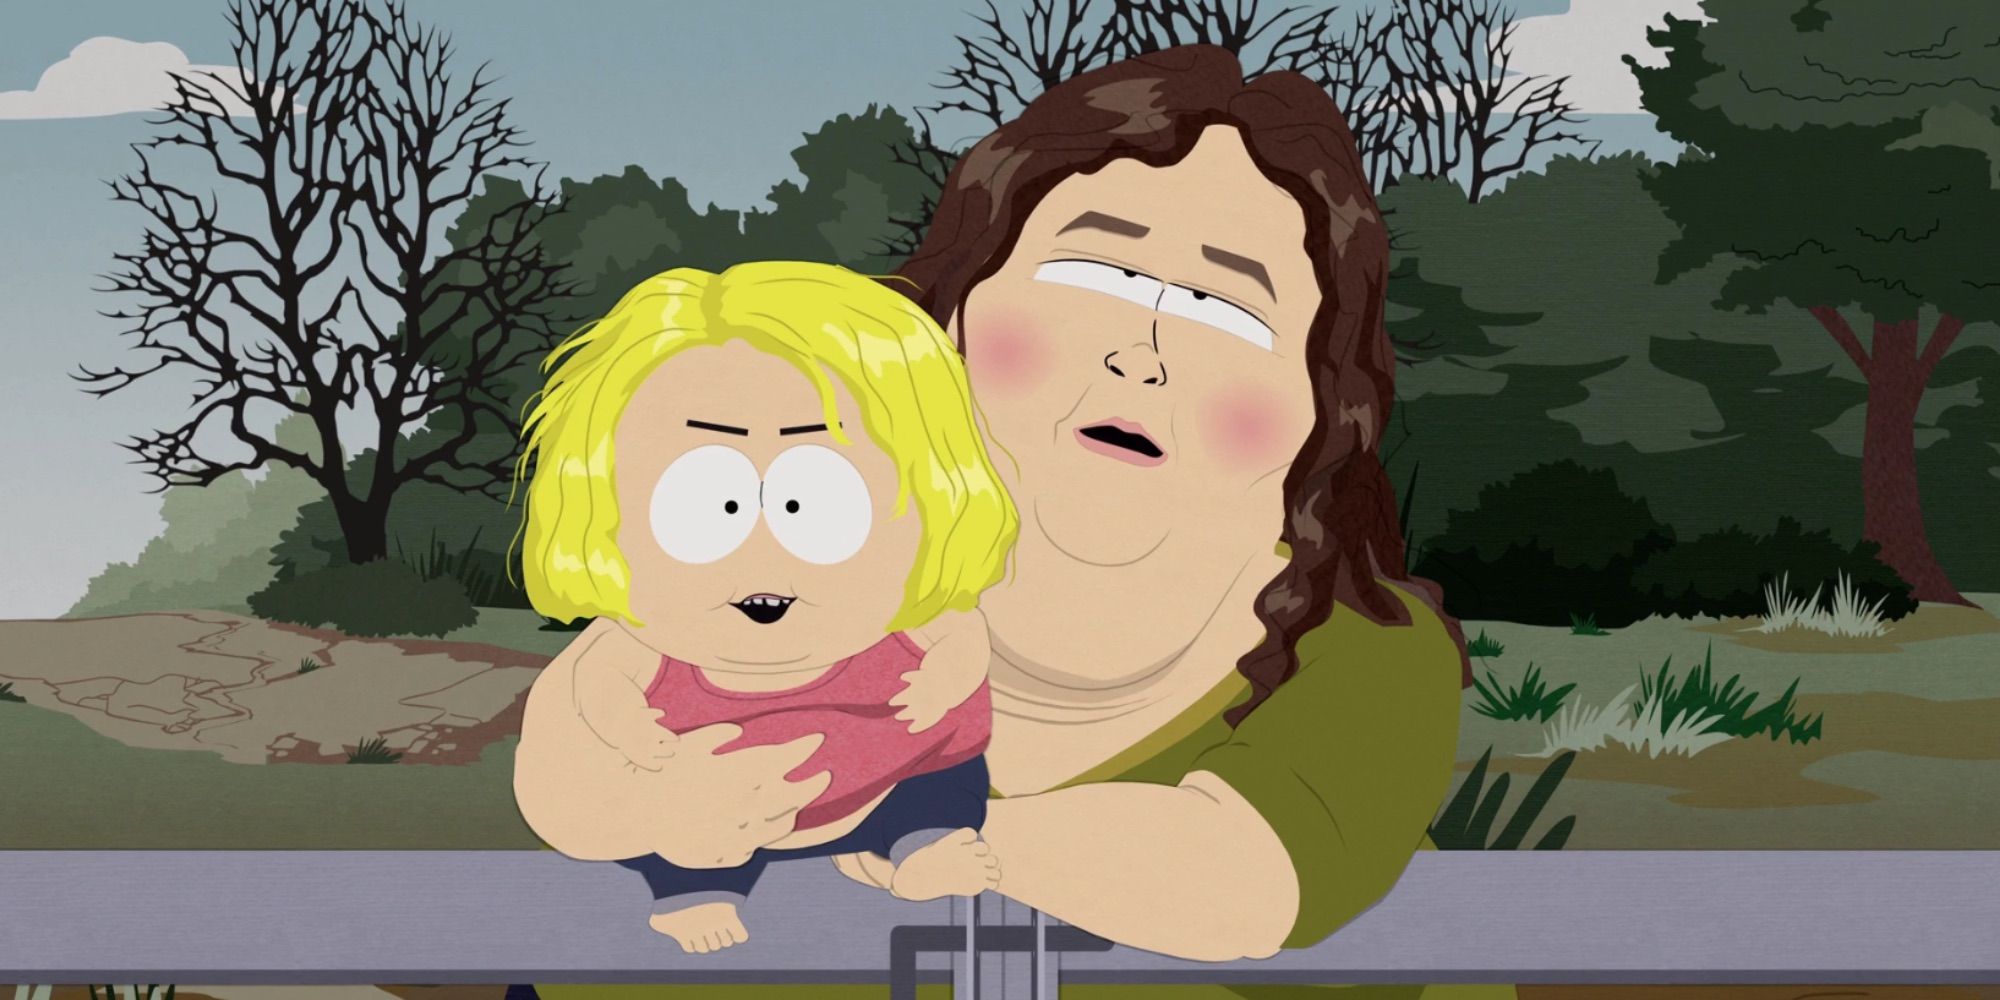 Honey Boo Boo is held by his mother in South Park